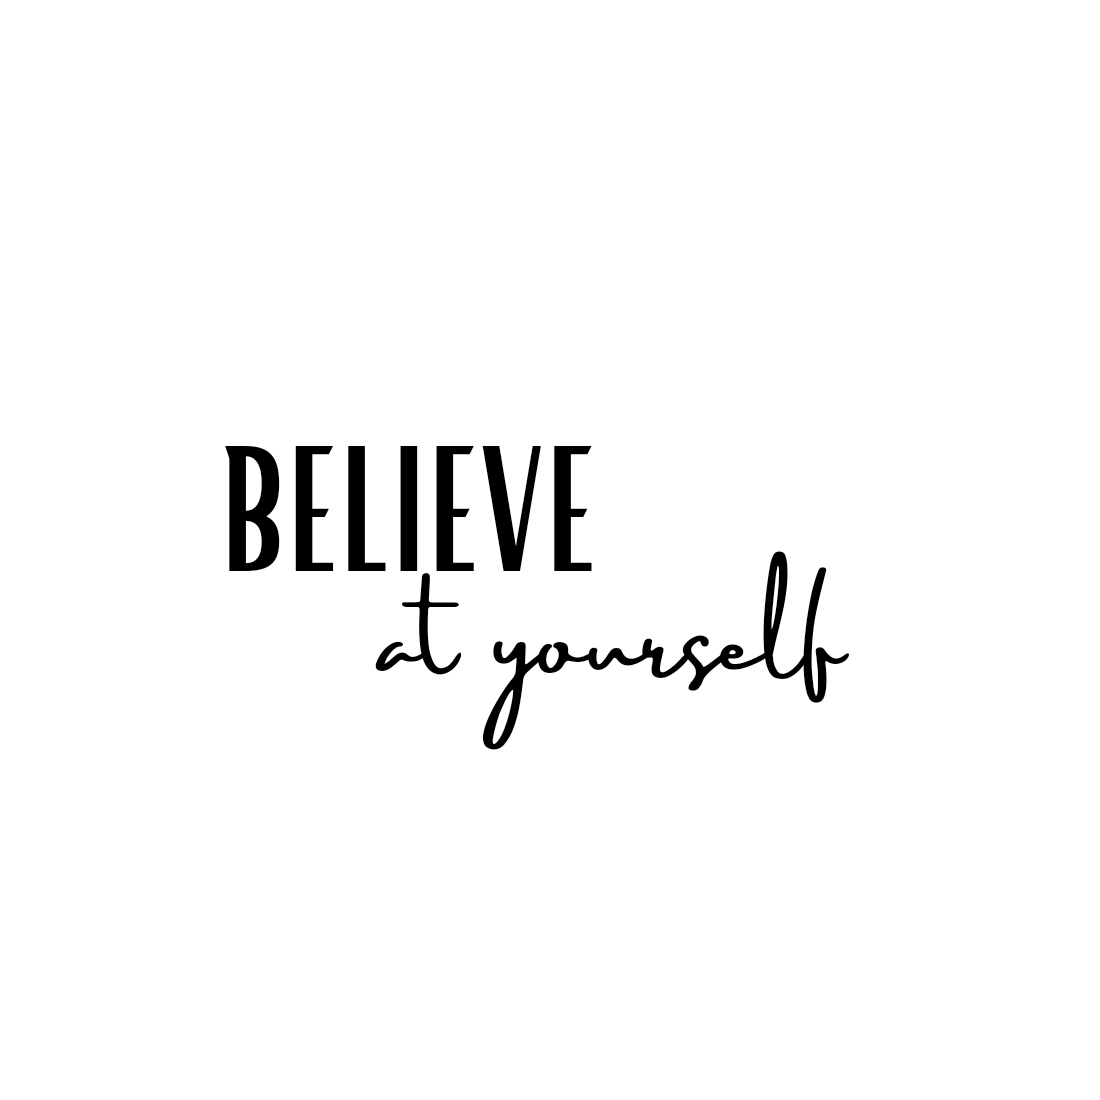 believe at yourself1 323